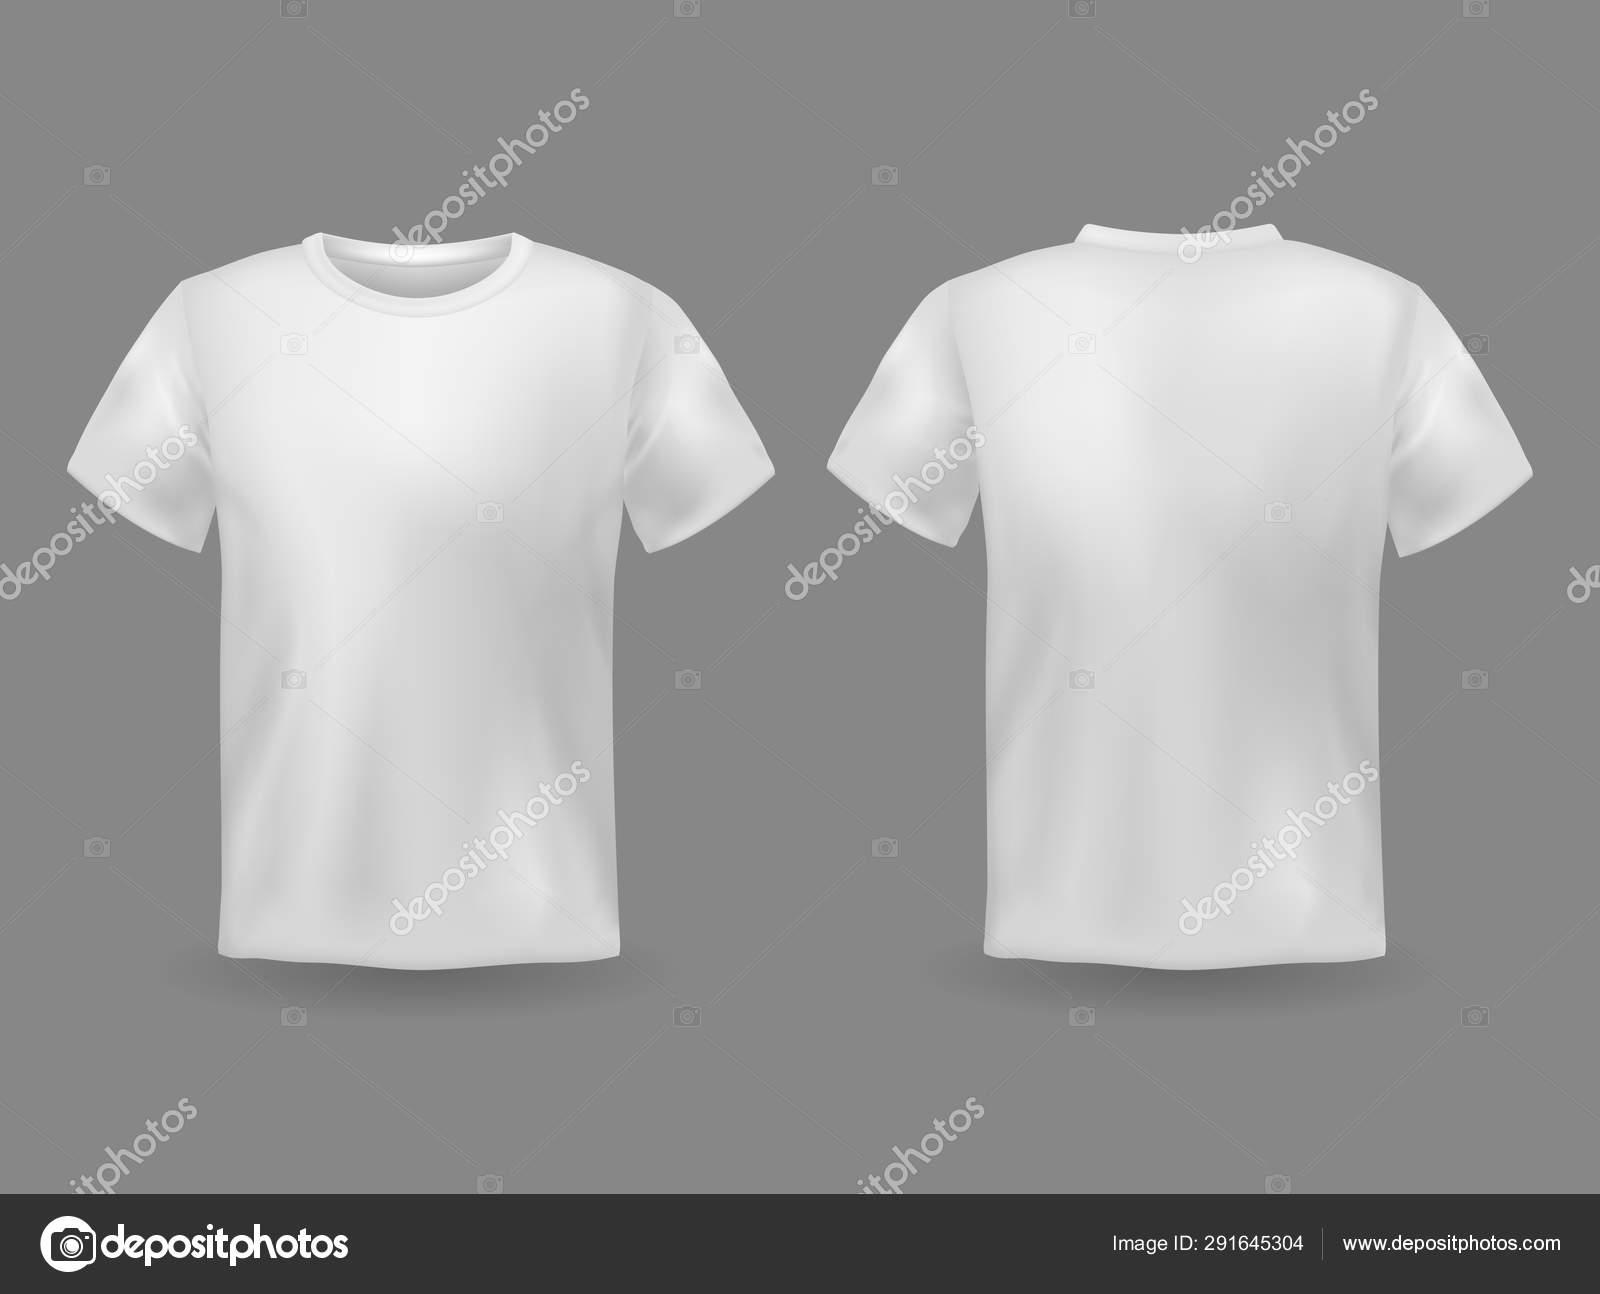 Download T Shirt Mockup White 3d Blank T Shirt Front And Back Views Realistic Sports Clothing Uniform Female And Male Clothes Vector Template Vector Image By C Yummybuum Vector Stock 291645304